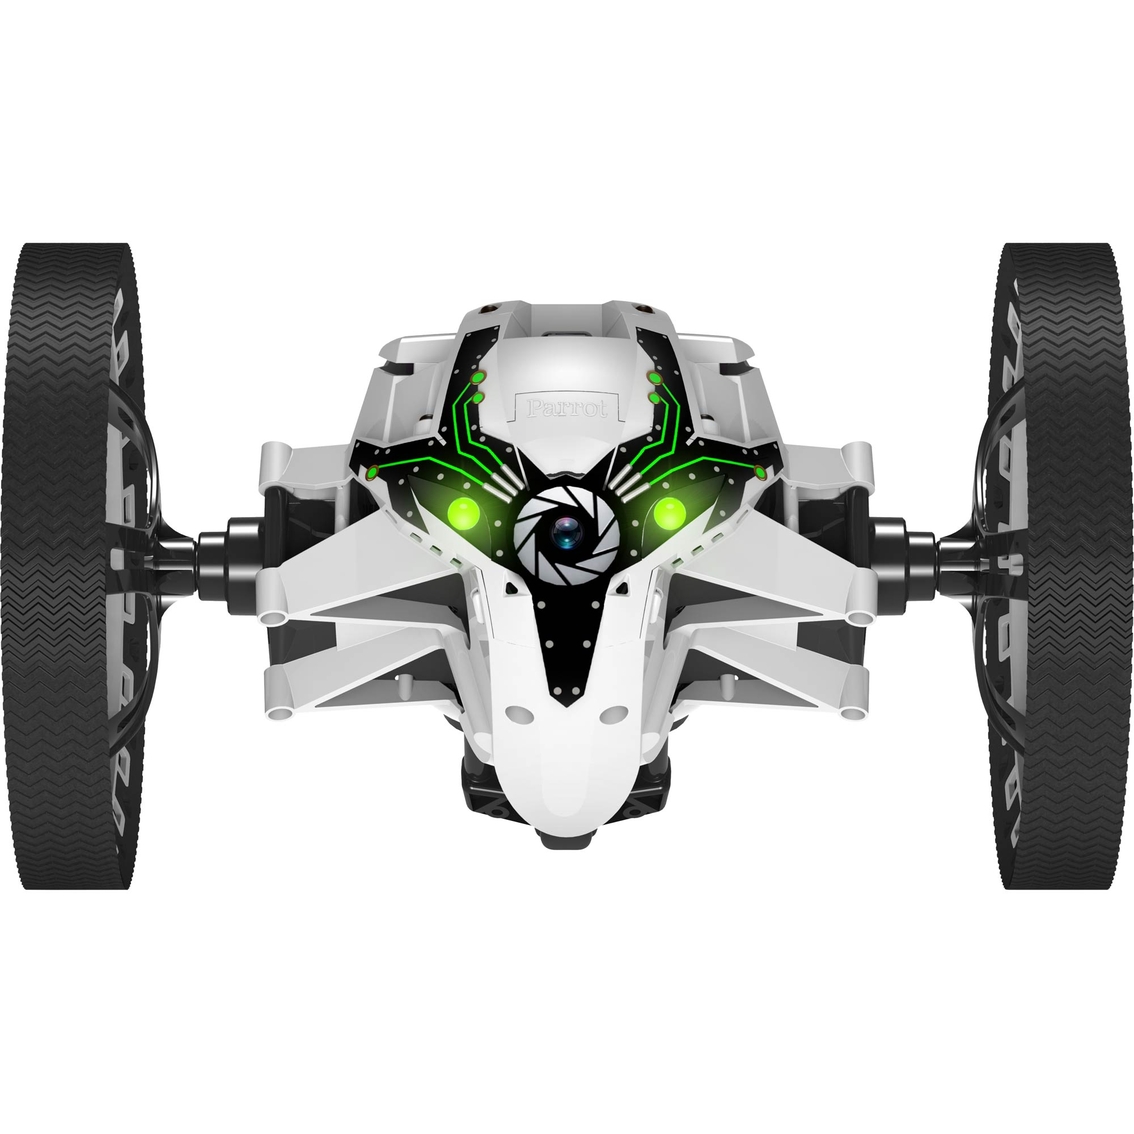 Parrot Jumping Sumo MiniDrone with Camera, White - Image 2 of 3